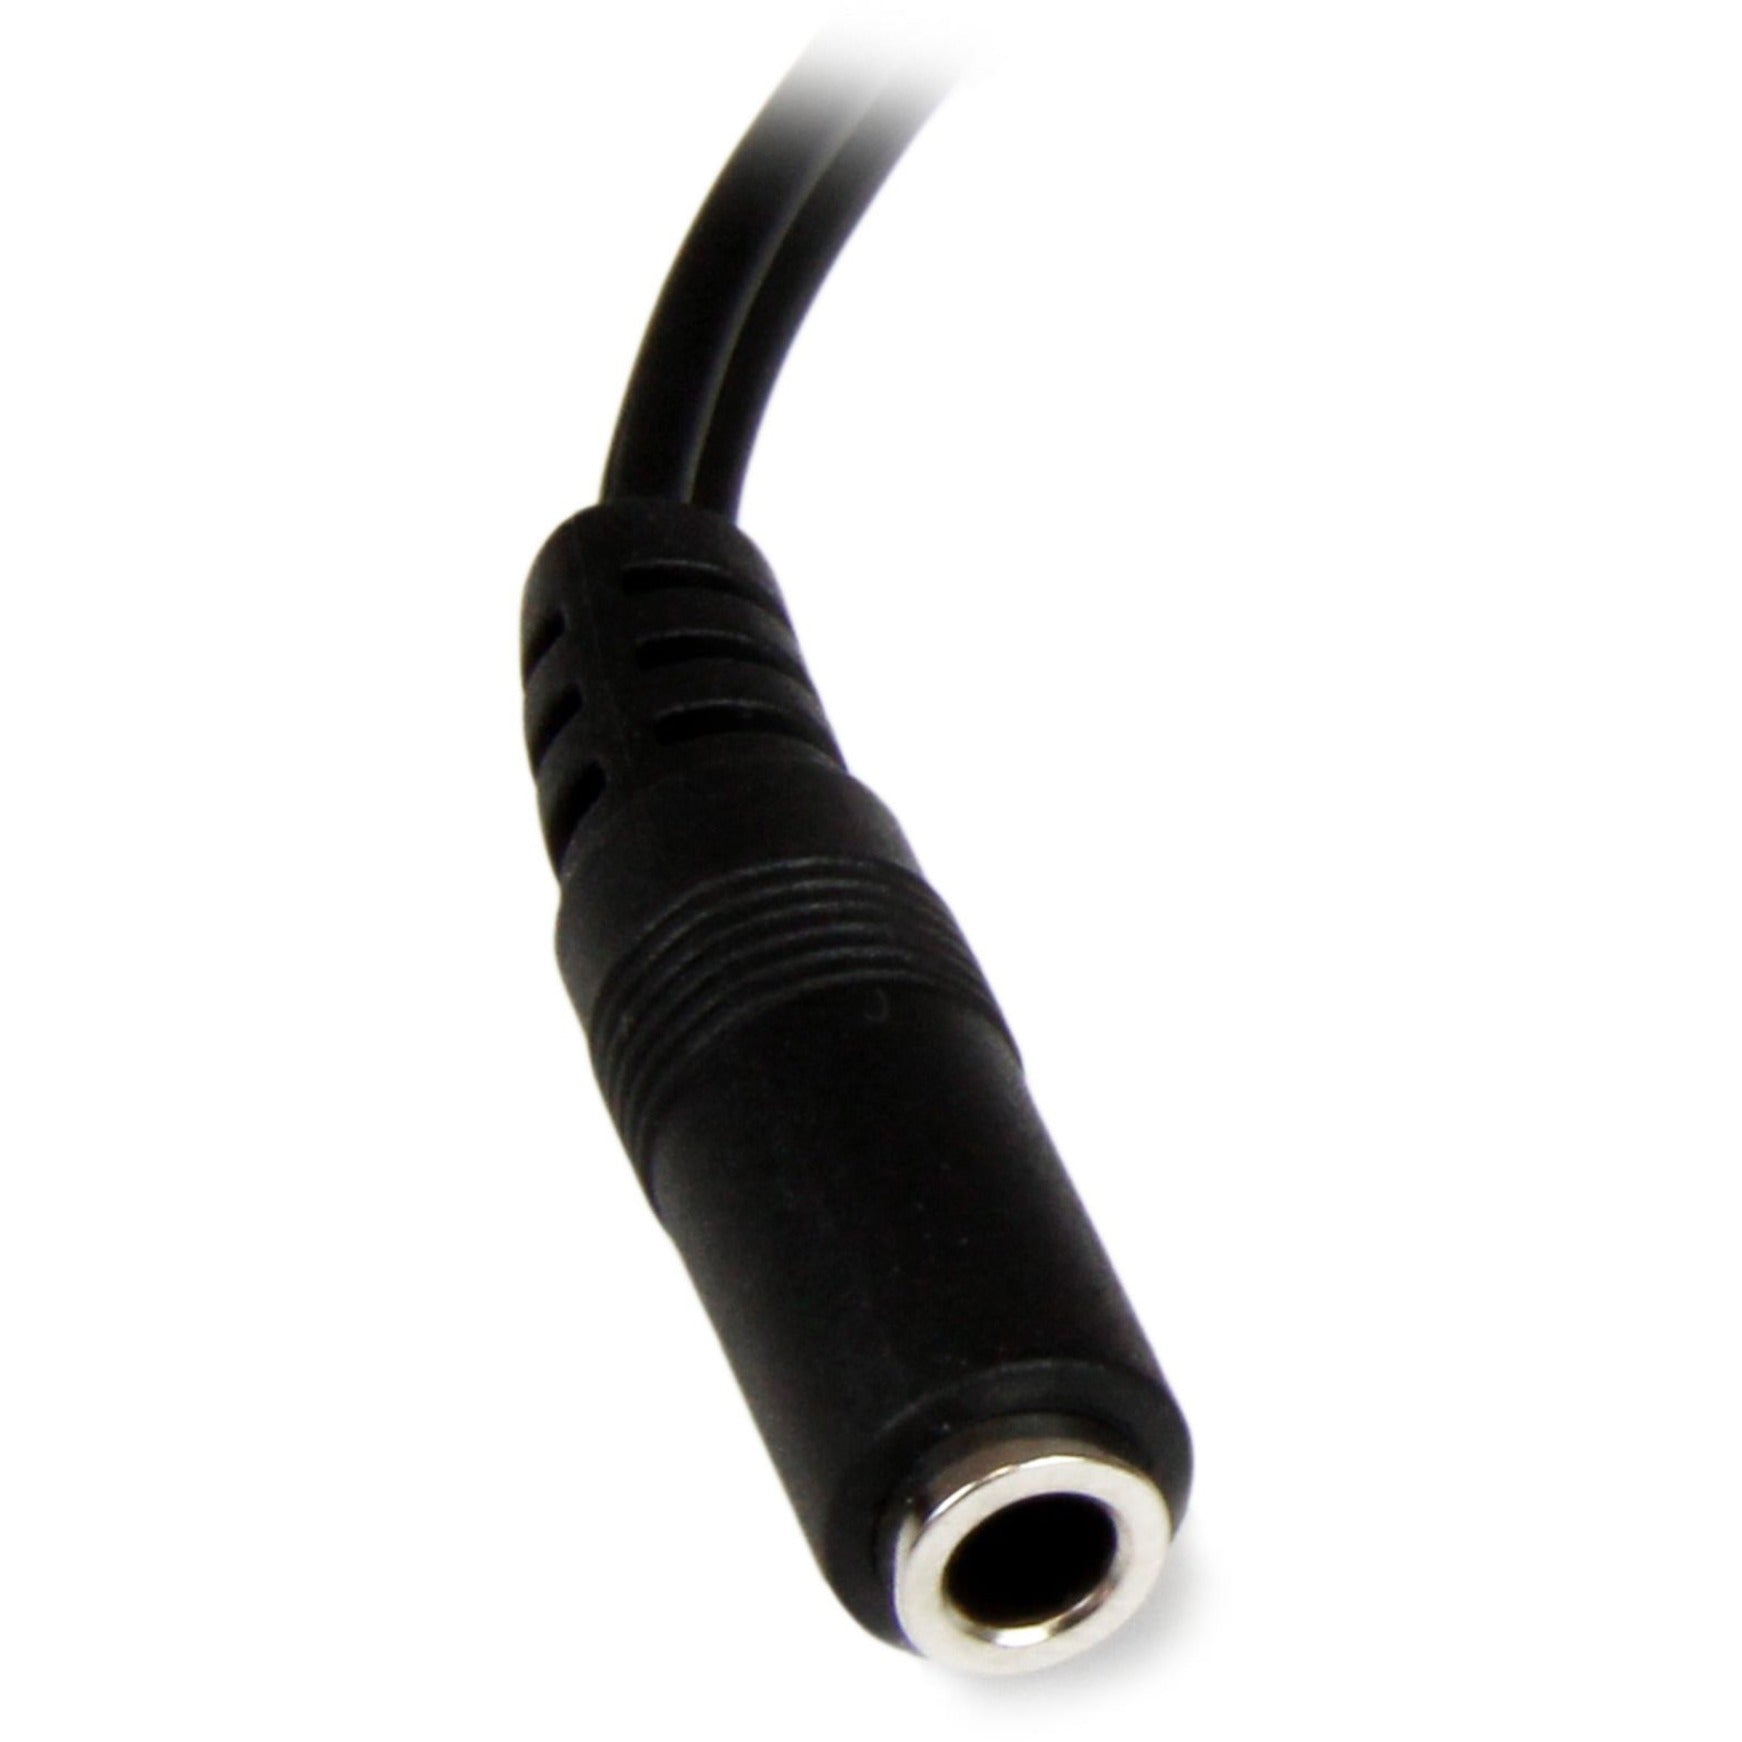 StarTech.com MUFMRCA 6in Stereo Audio Cable - Connect Your MP3 Player, iPod, or Audio Device to RCA Inputs